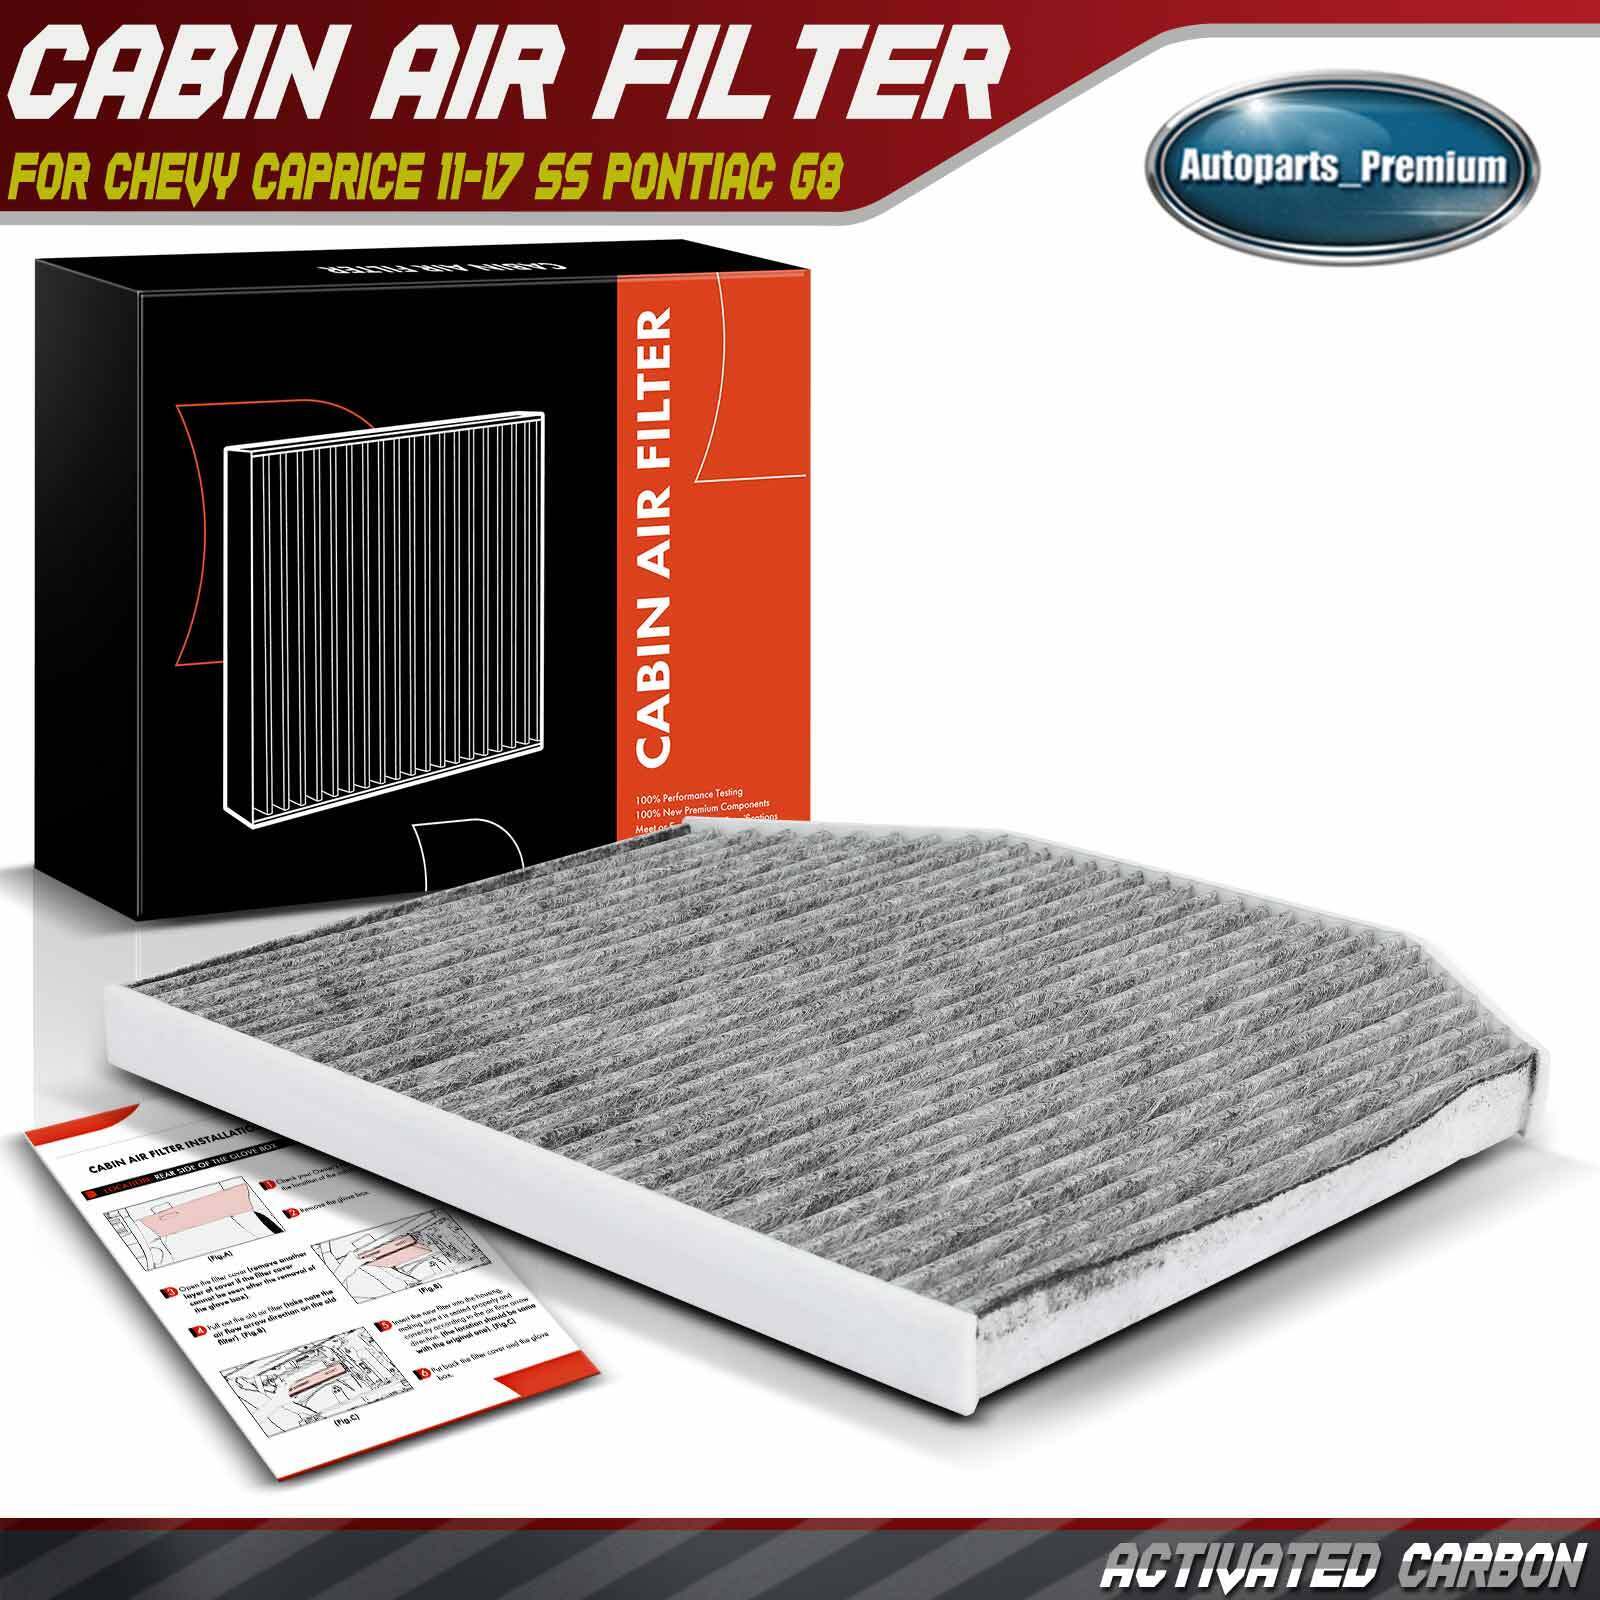 Activated Carbon Cabin Air Filter for Chevrolet Caprice 2011-2017 SS Pontiac G8